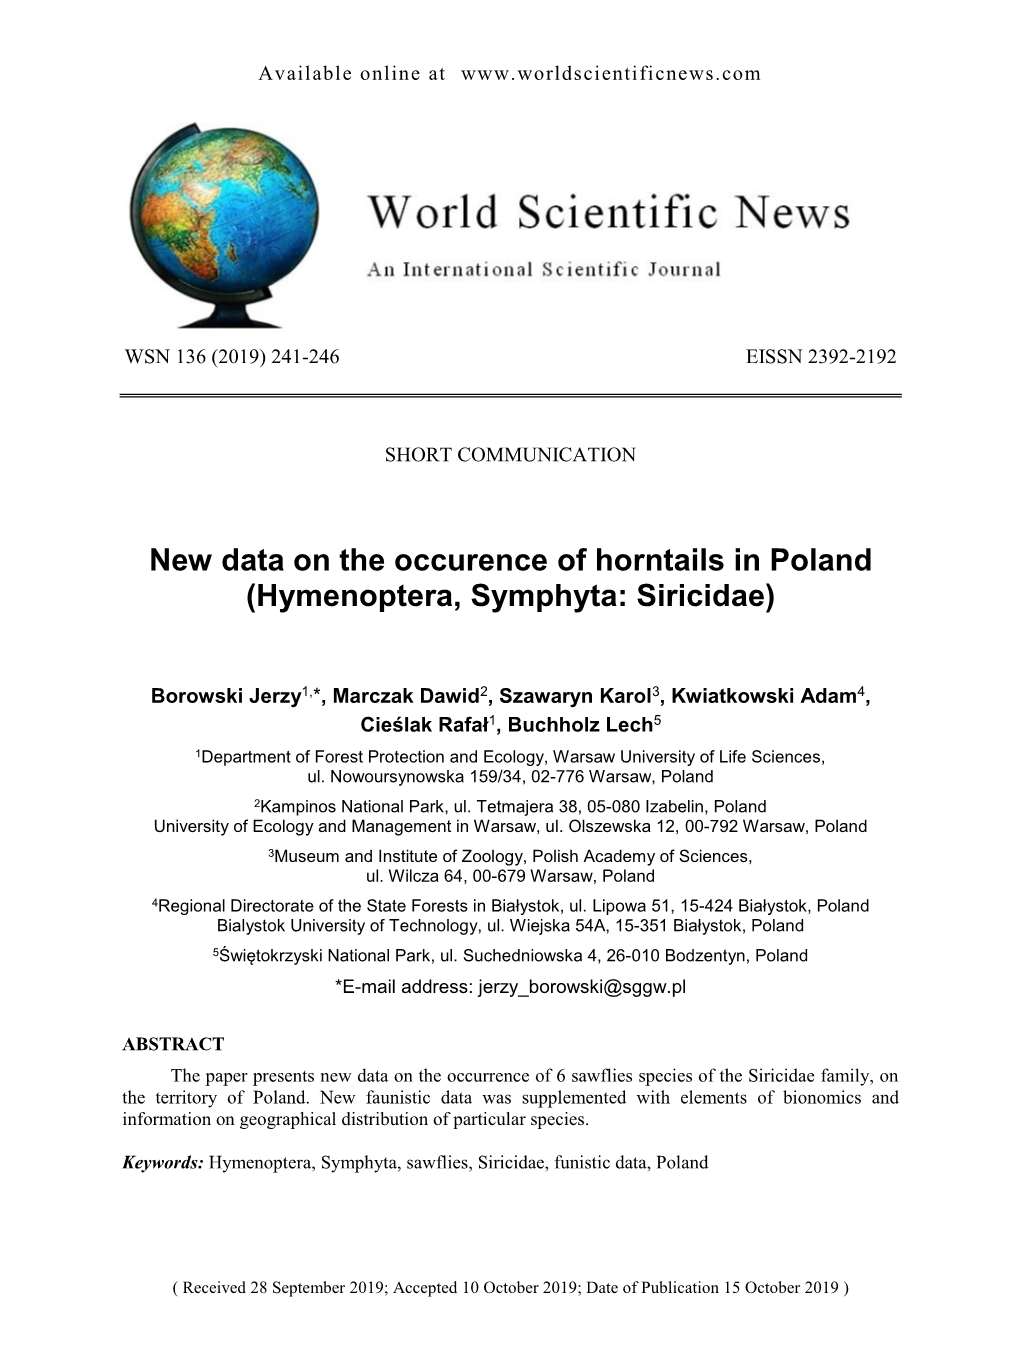 New Data on the Occurence of Horntails in Poland (Hymenoptera, Symphyta: Siricidae)